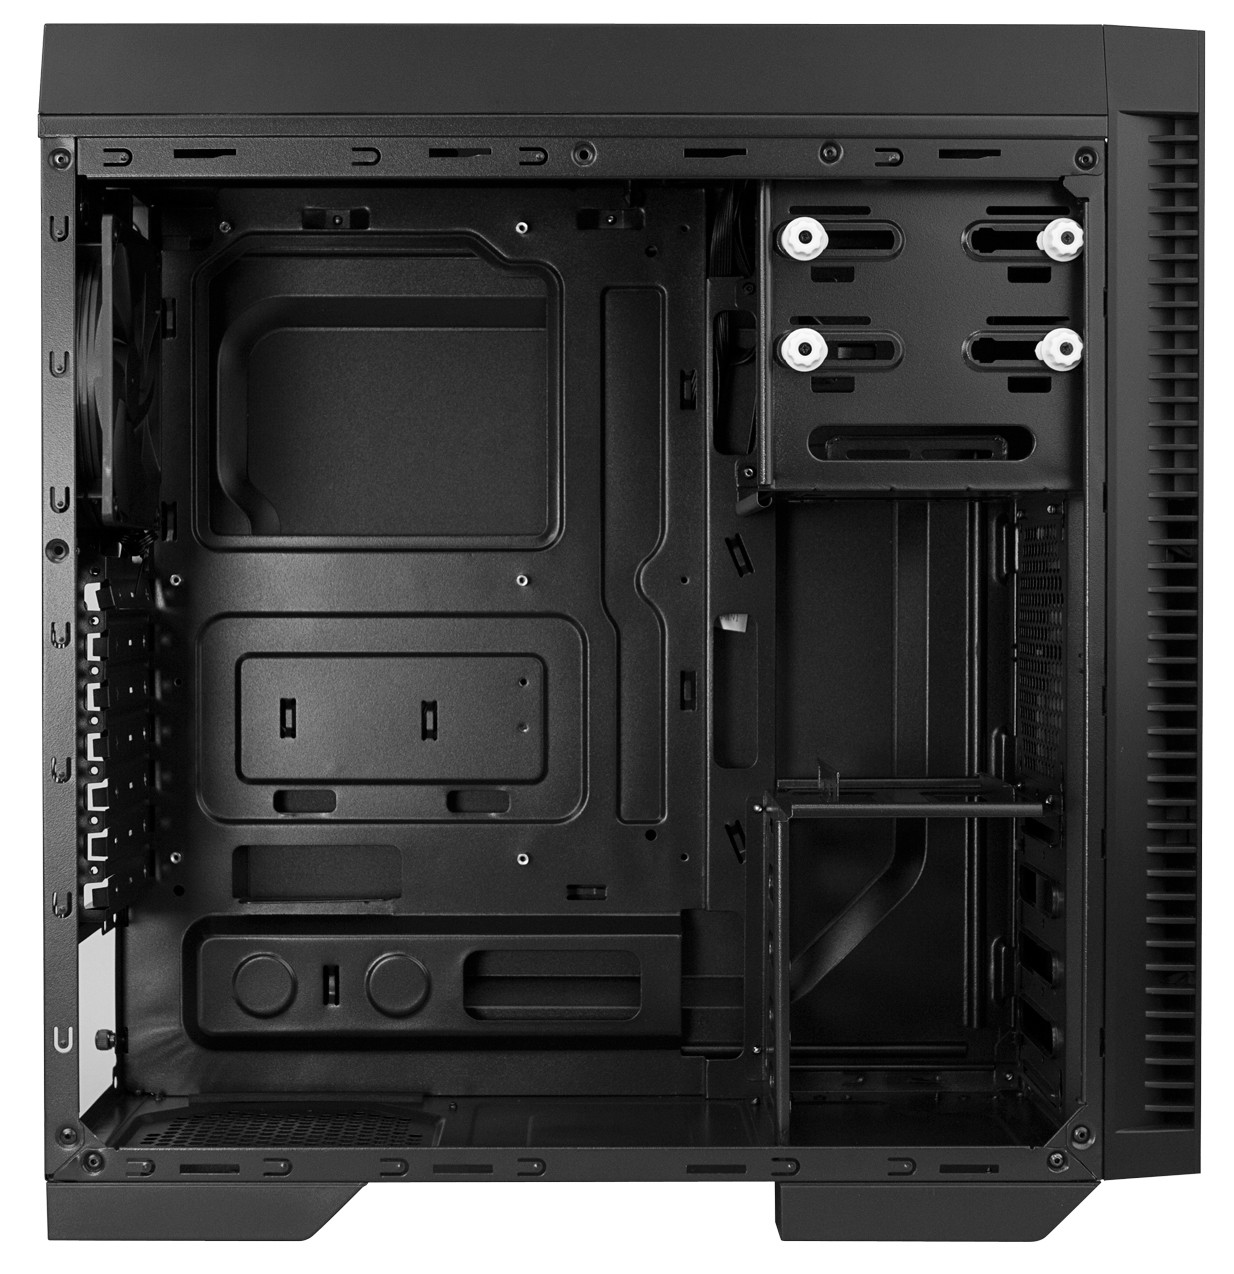 Antec Announces the VSP-5000 Case with Sound-Dampening | TechPowerUp